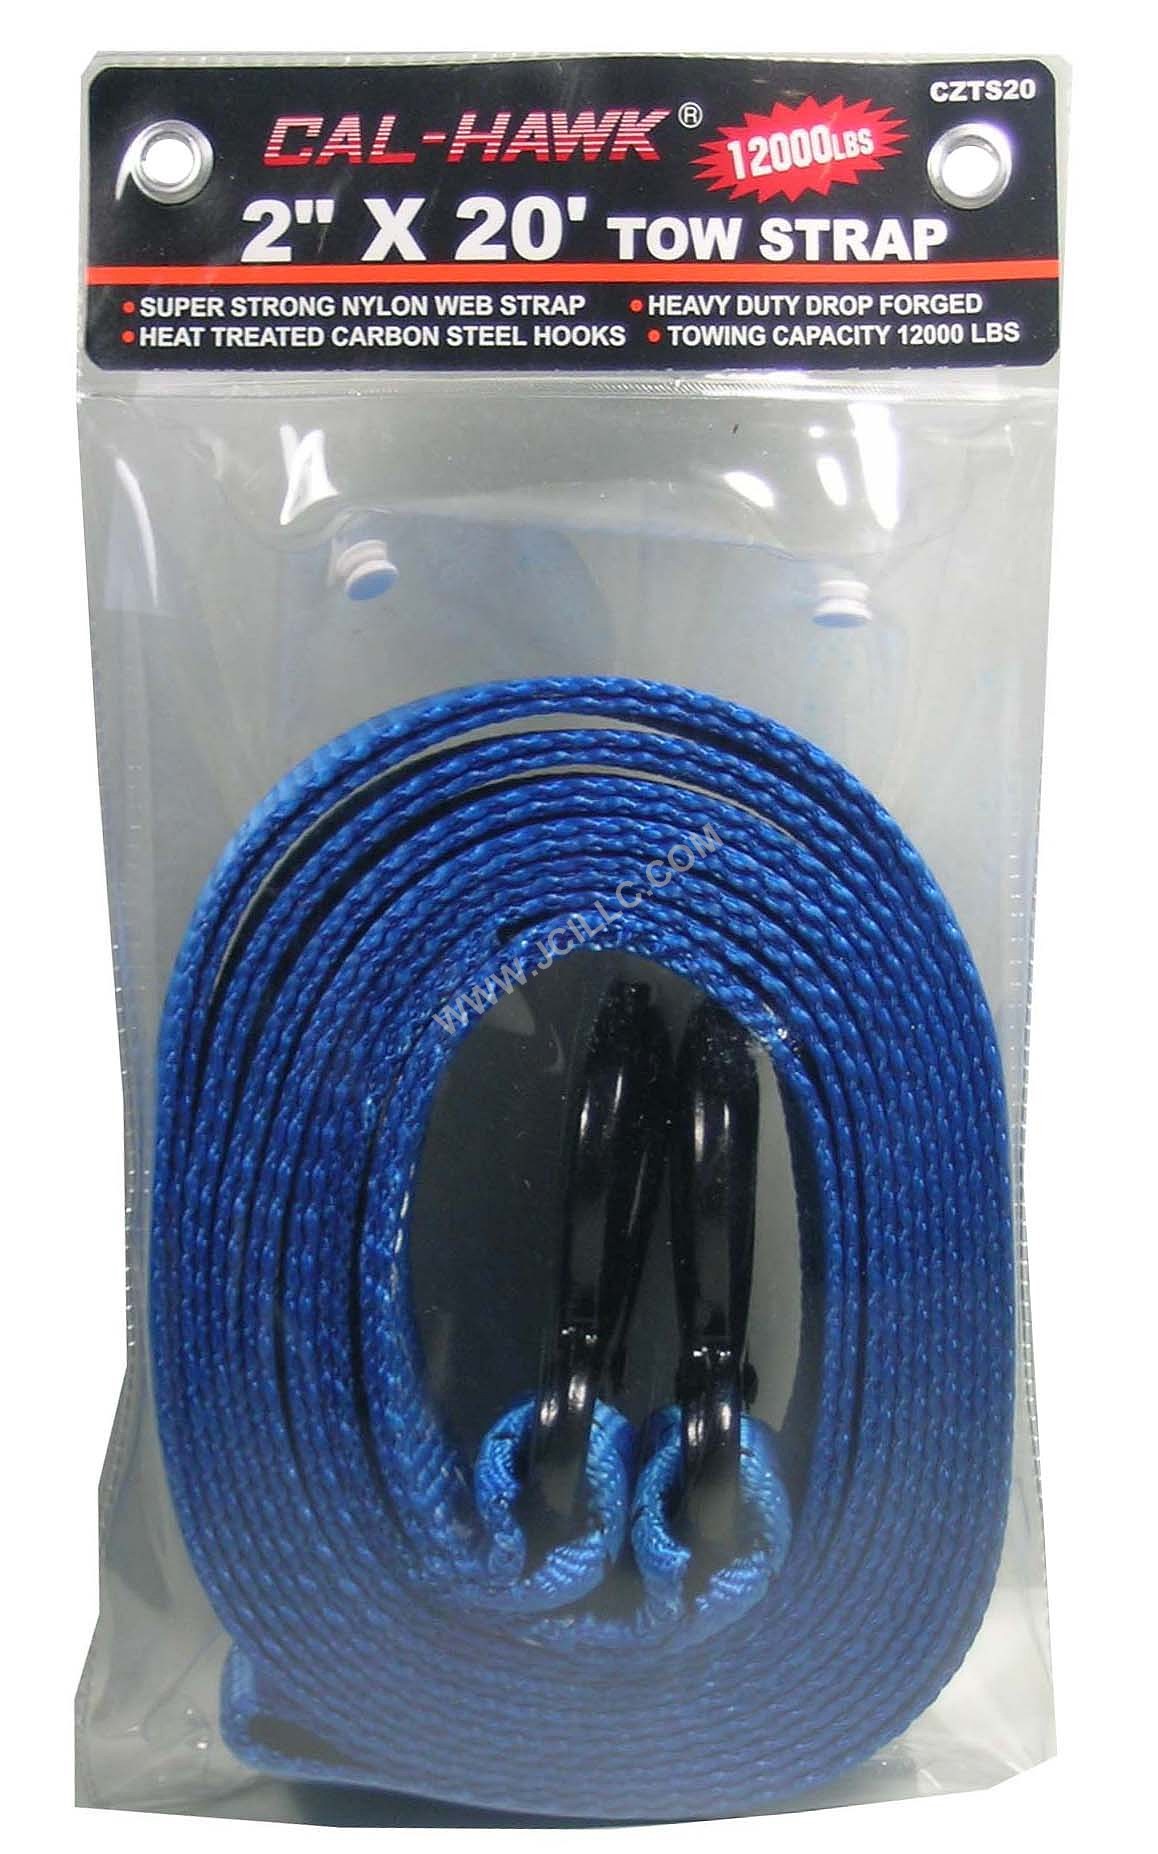 2 INCH X 20 FOOT TOW STRAP, Tools Towing Tow Ropes , wholesale tools at